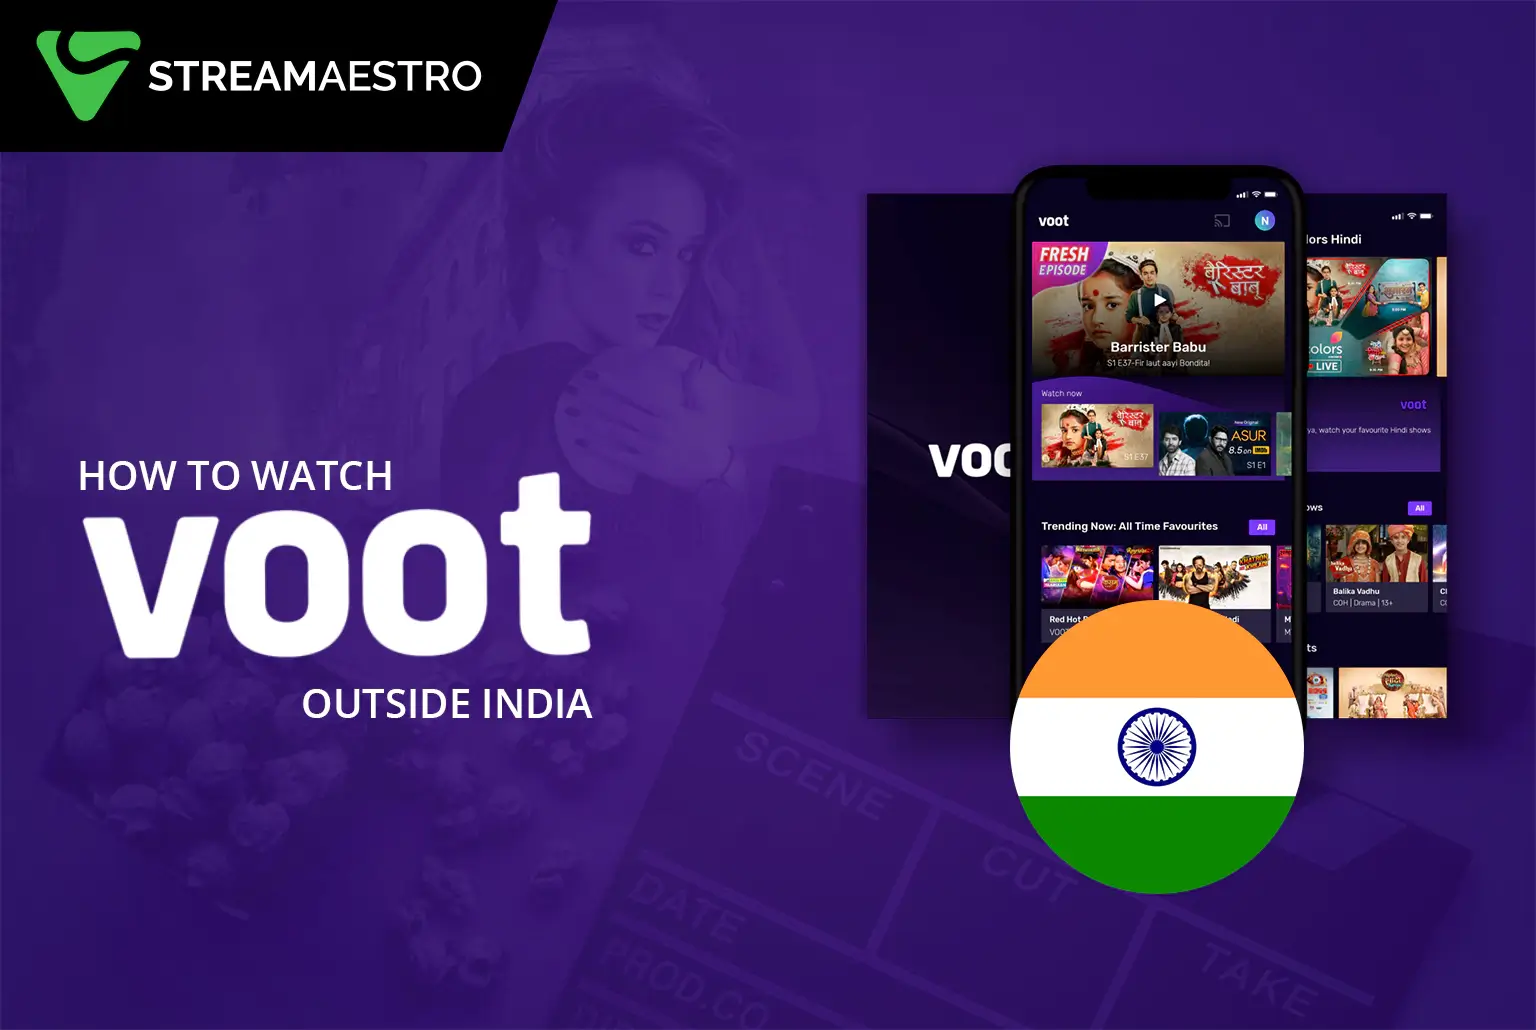 Watch Voot Outside India